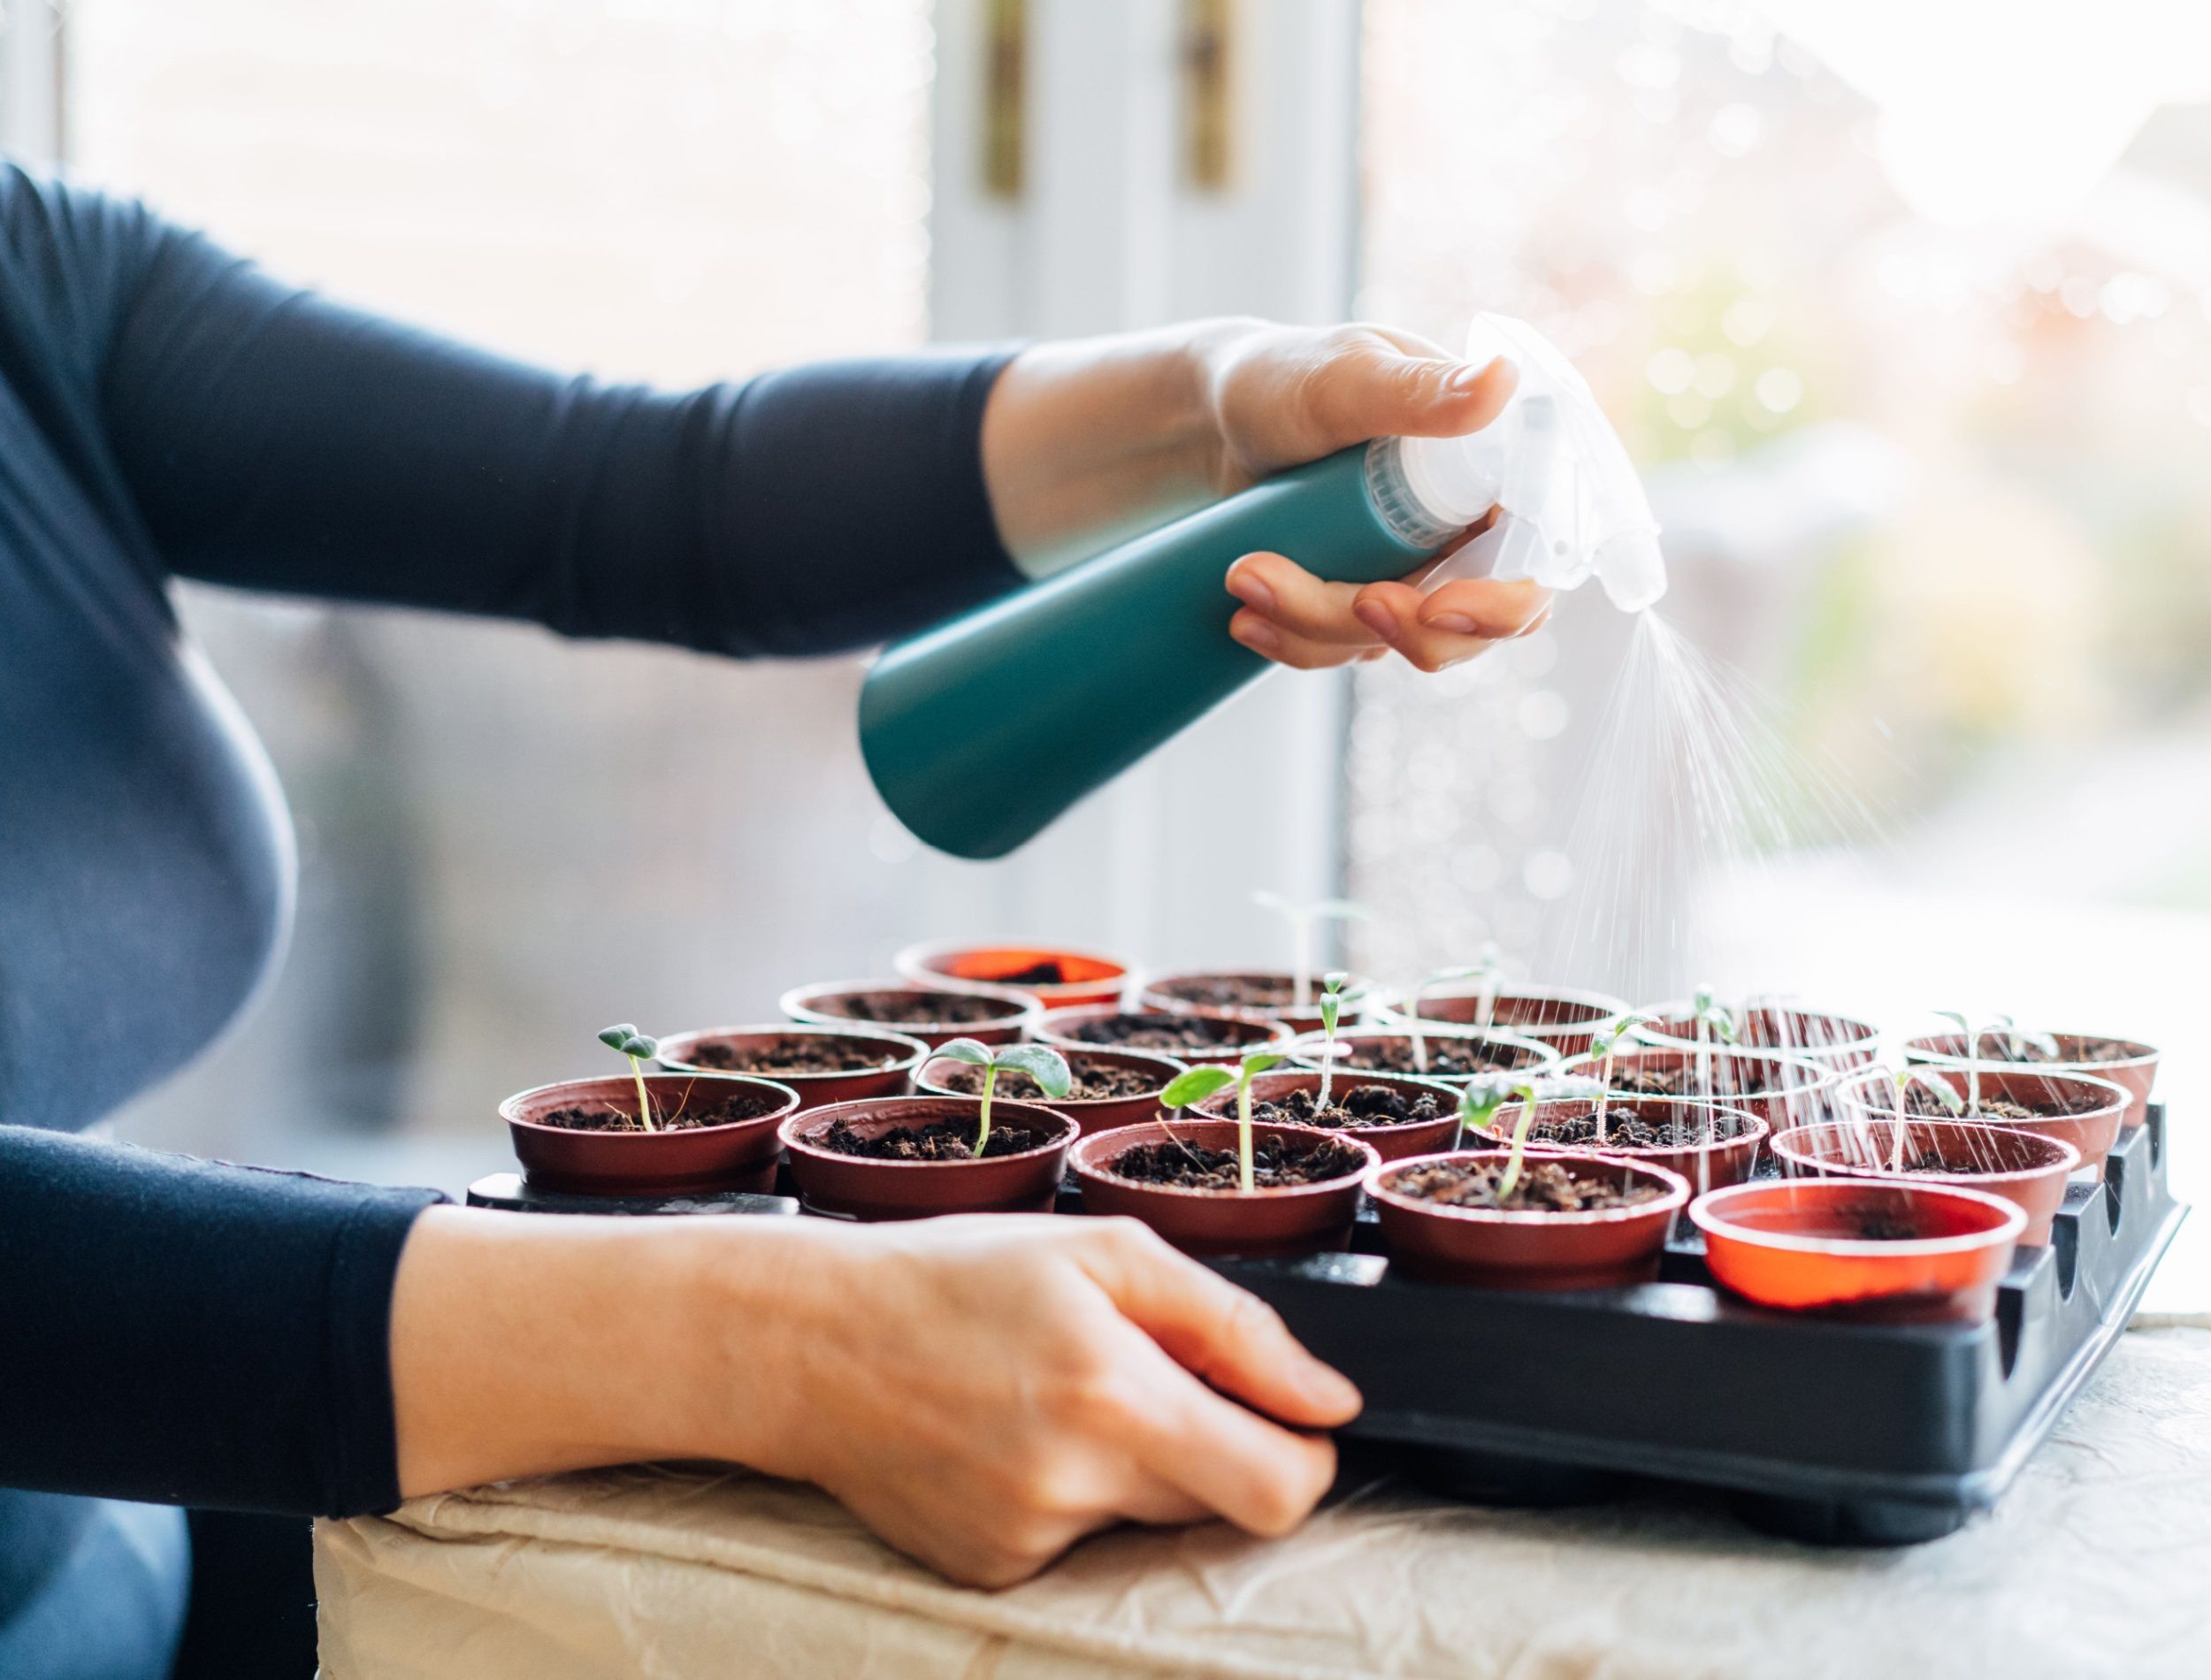 Woman watering, spraying plants sprouts growing from seeds in the small pots at home. Preparing for summer, new kitchen garden season. Sowing seeds. Soft selective focus, copy space